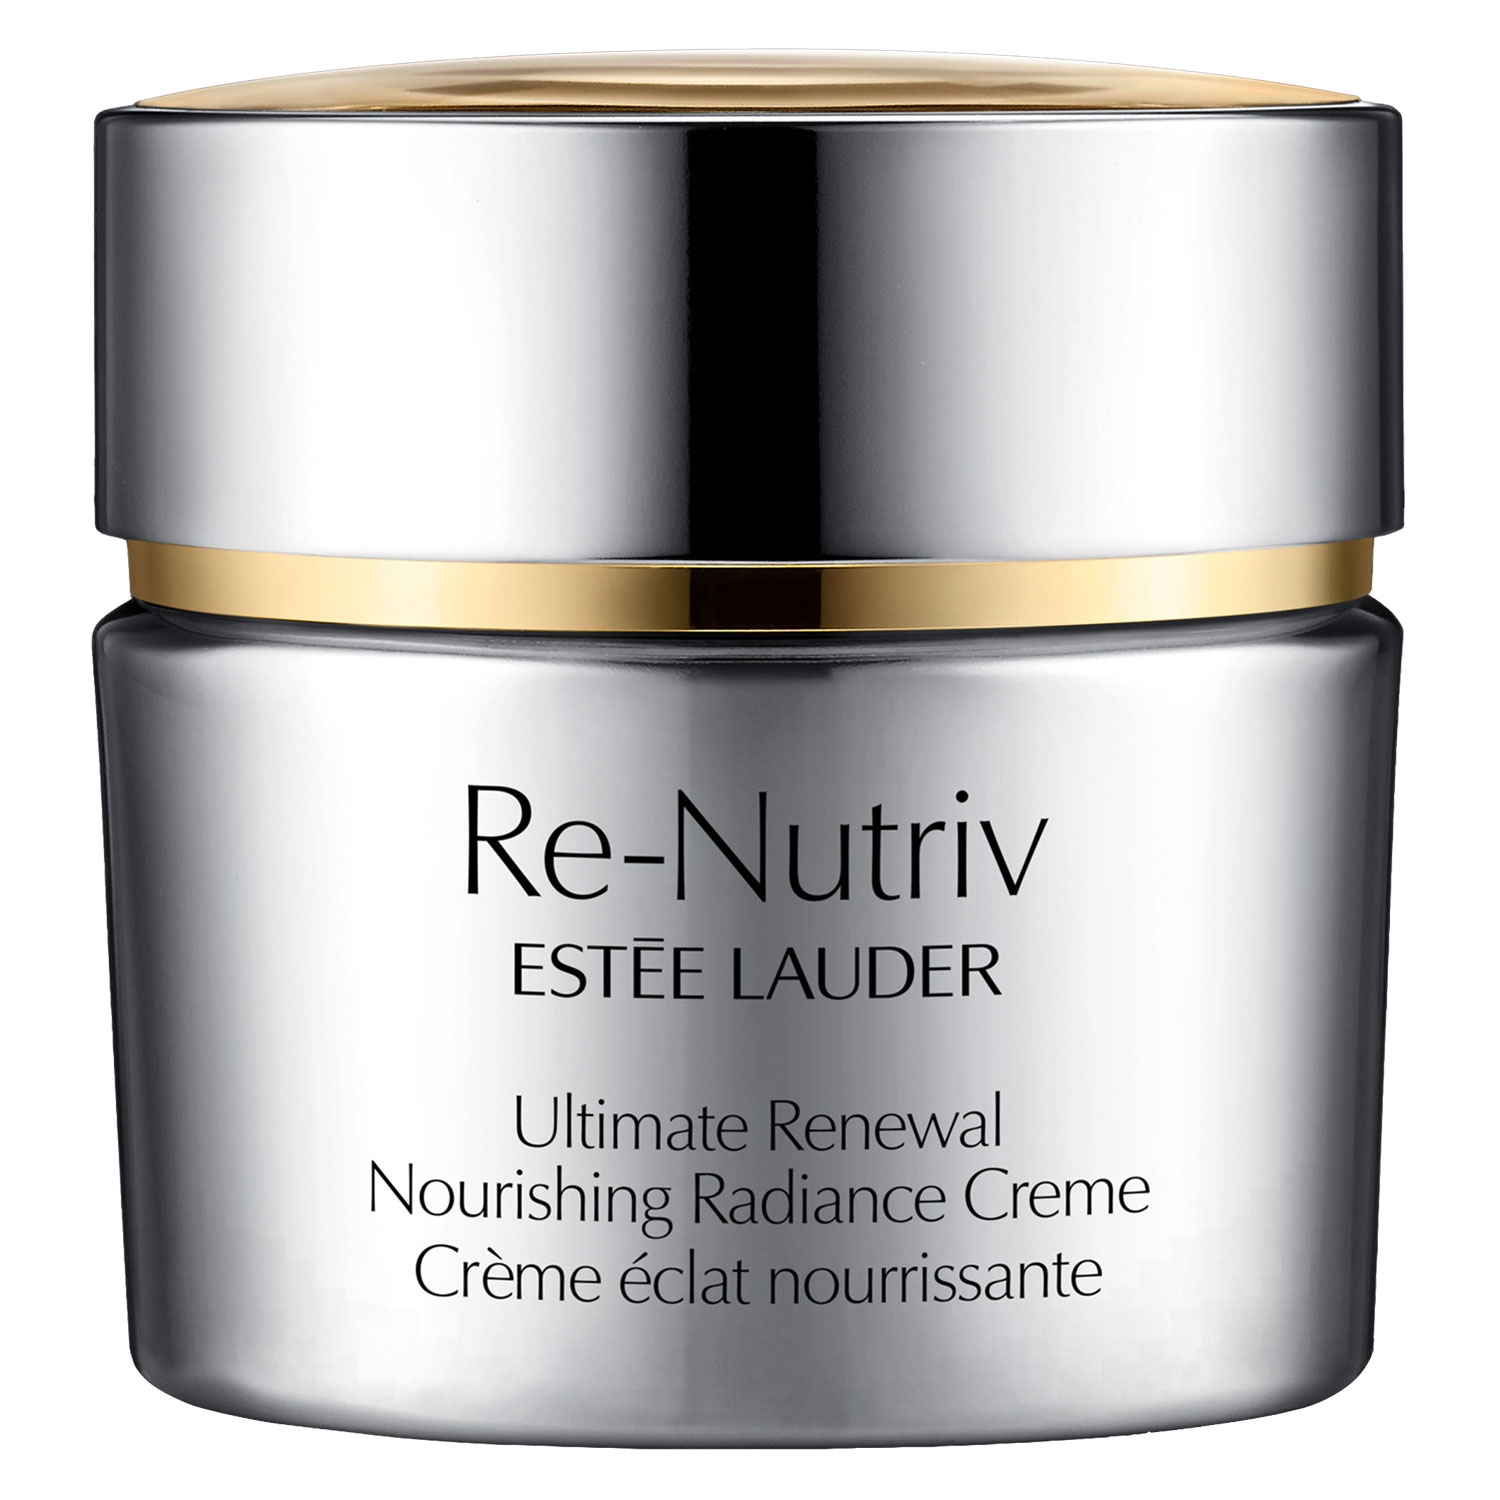 Product image from Re-Nutriv - Ultimate Renewal Nourishing Radiance Creme